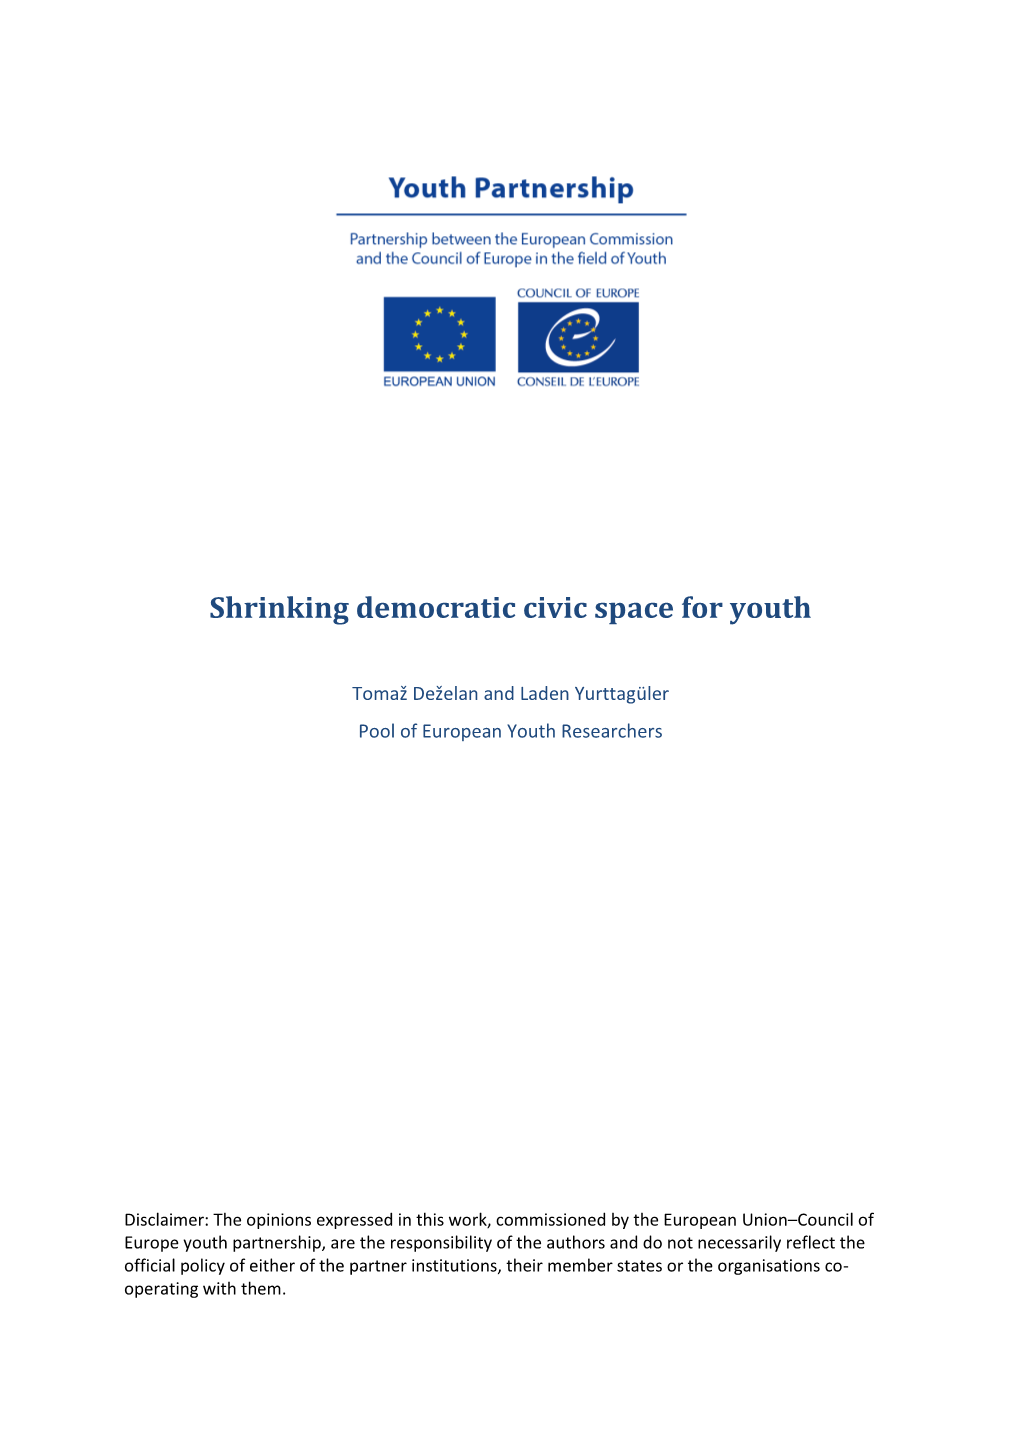 Shrinking Democratic Civic Space for Youth